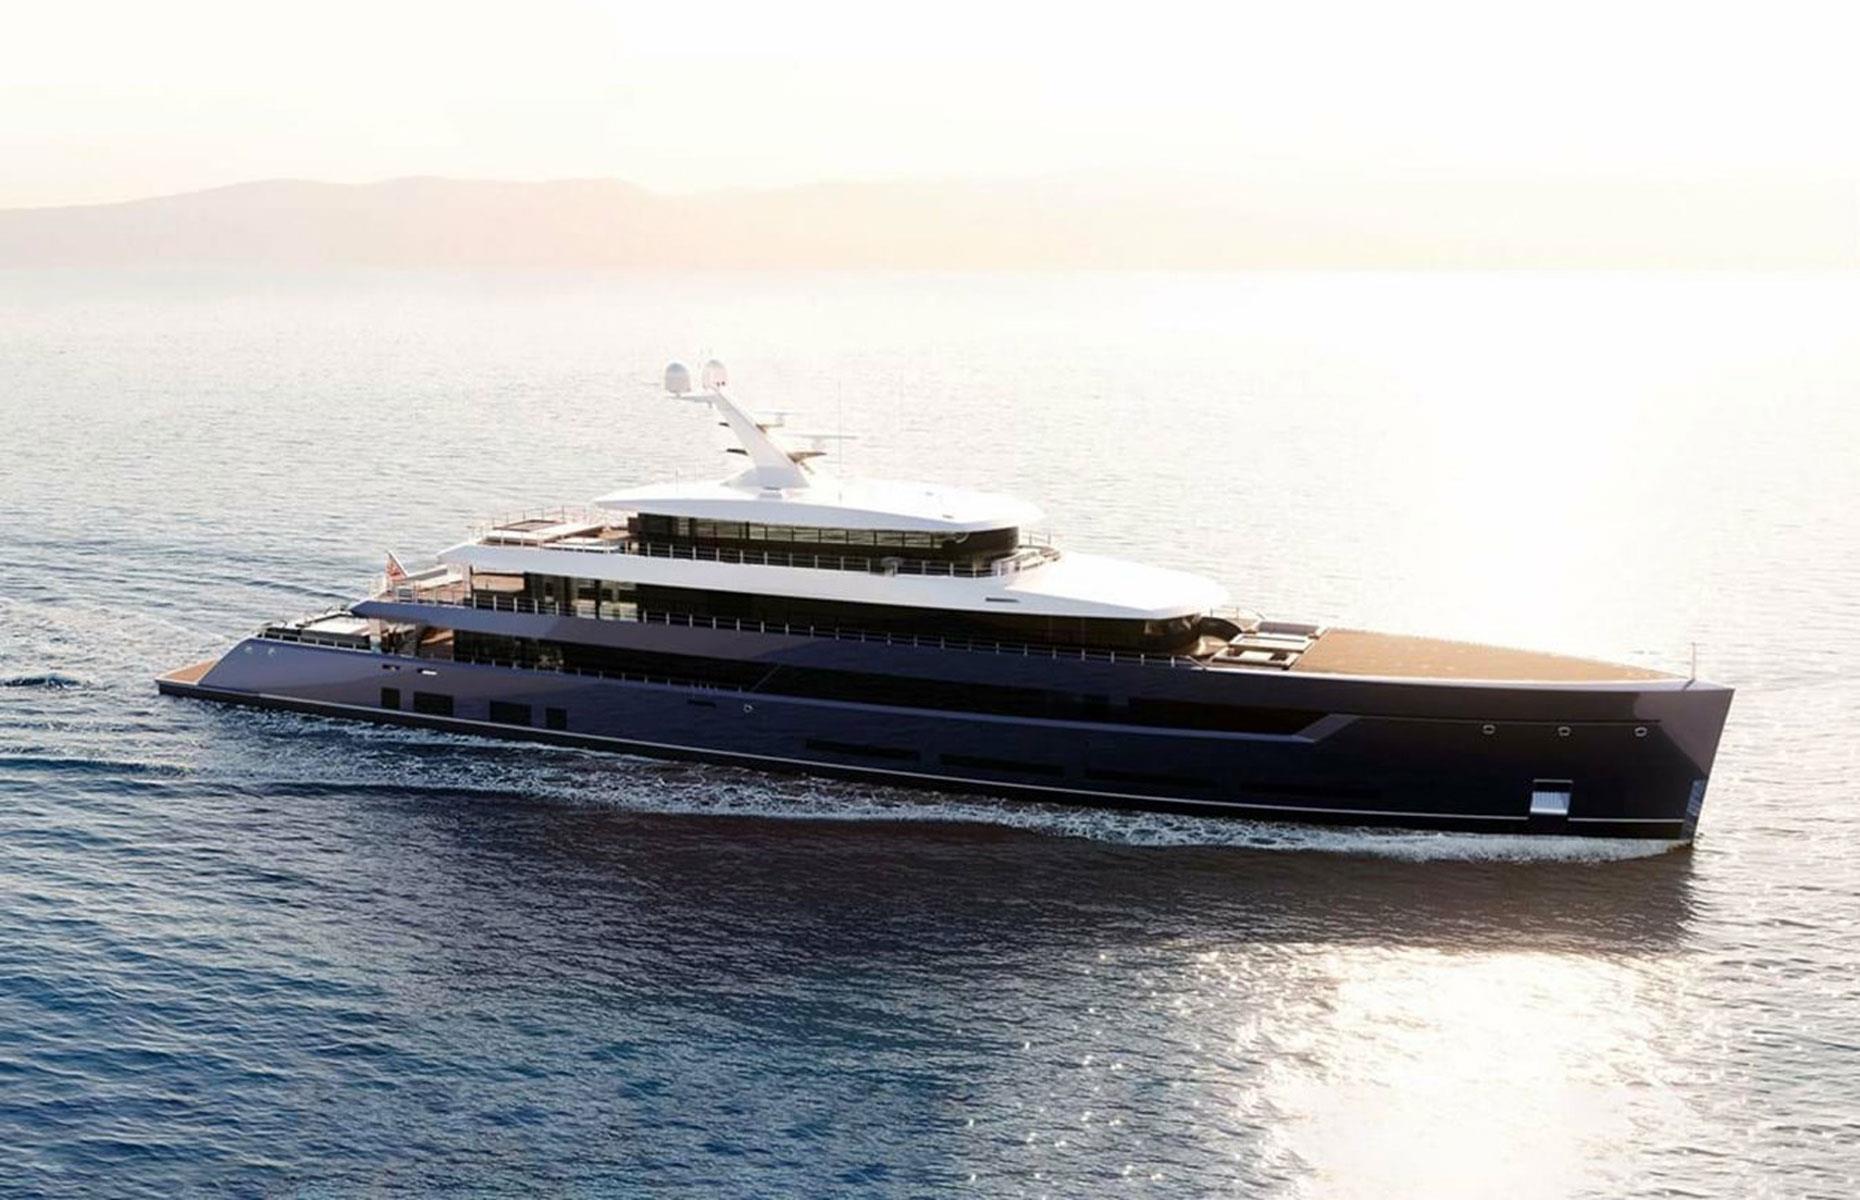 <p>On the other hand, the asking price for Feadship's <em>Project 825 </em><em>has</em> been revealed.</p>  <p>Due for delivery later in the year, the 249-foot superyacht is currently available for $186 million via Burgess Yachts.</p>  <p>Newly-built vessels of this size and caliber are usually custom orders, so it's rare for one to come on the market. The yacht is likely to be snapped up by a member of the super-rich elite who doesn't have the patience to wait years for a bespoke job<strong>.</strong></p>